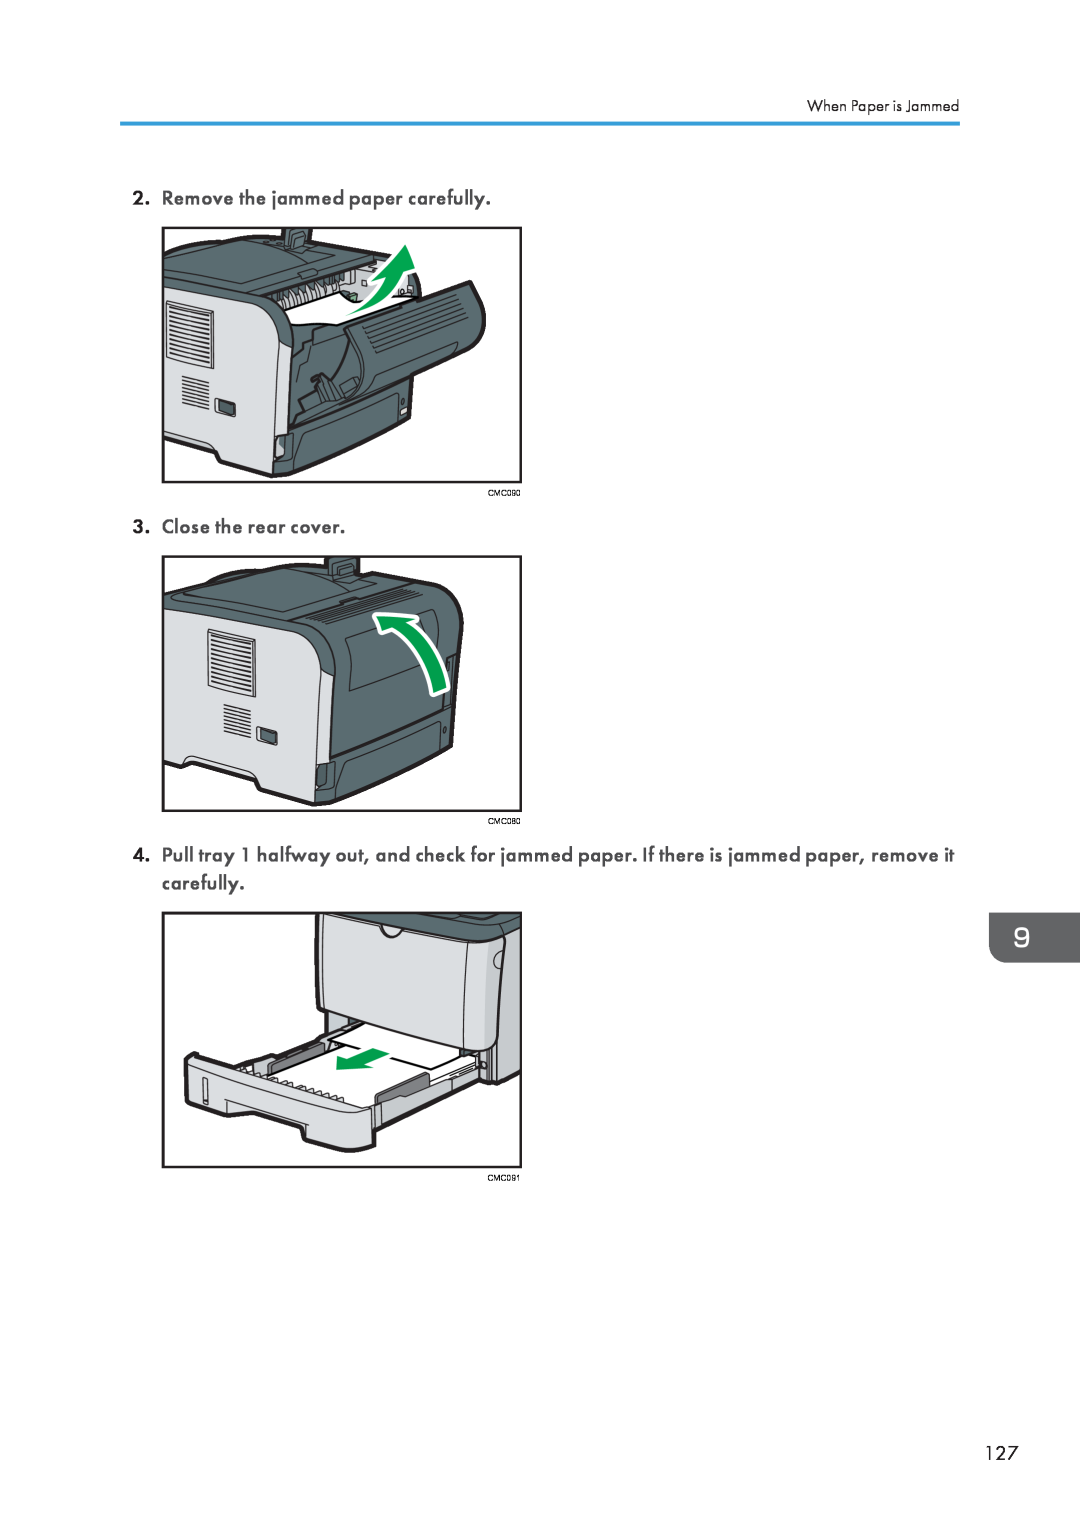 Ricoh SP 3500N manual Remove the jammed paper carefully, Close the rear cover, When Paper is Jammed, CMC090, CMC080, CMC091 